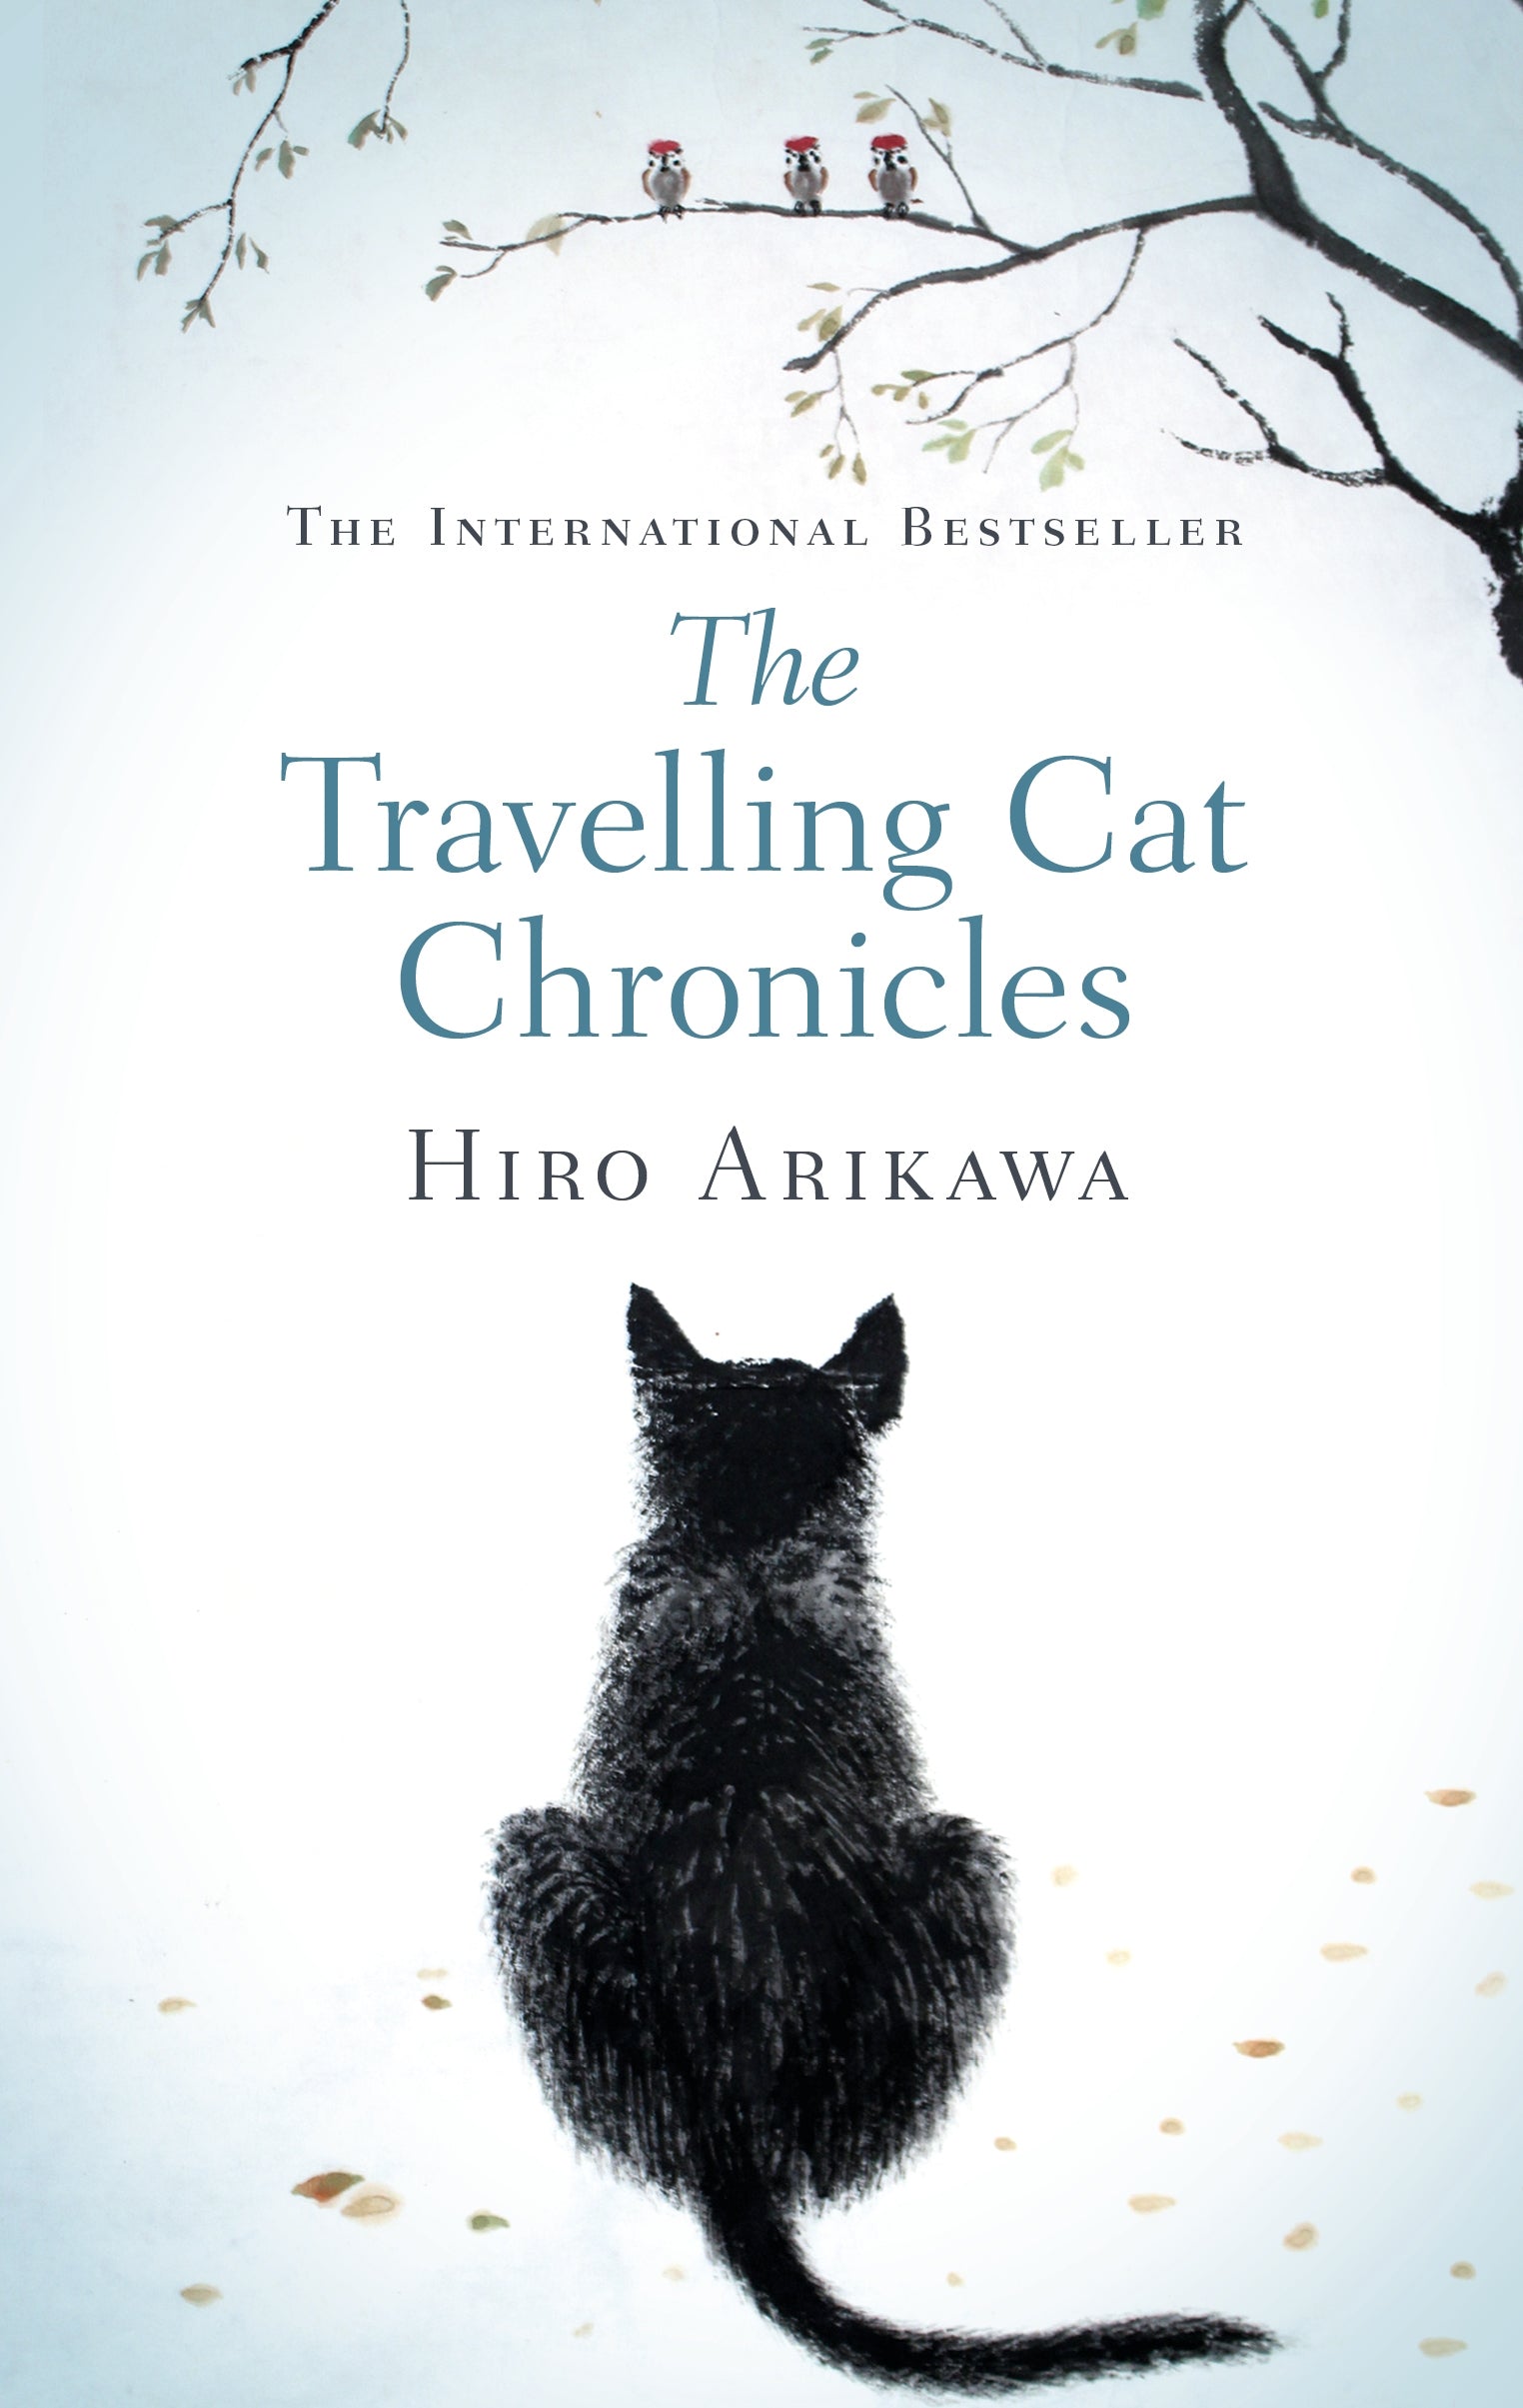 Cover of "The Travelling Cat Chronicles" by Hiro Arikawa